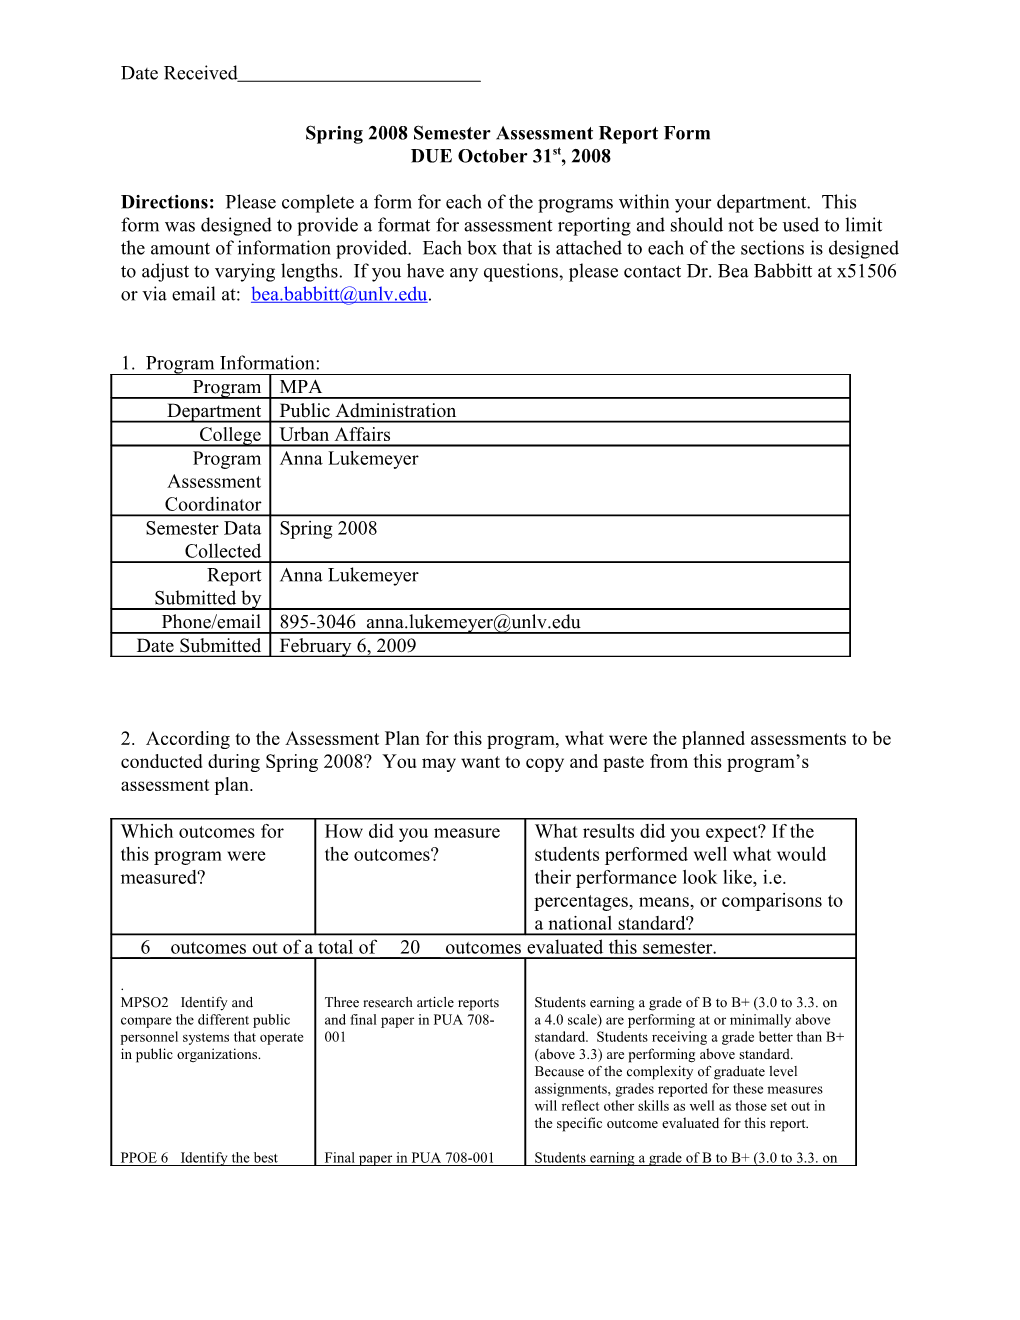 Annual Assessment Report Form for Student Learning Outcomes Assessment